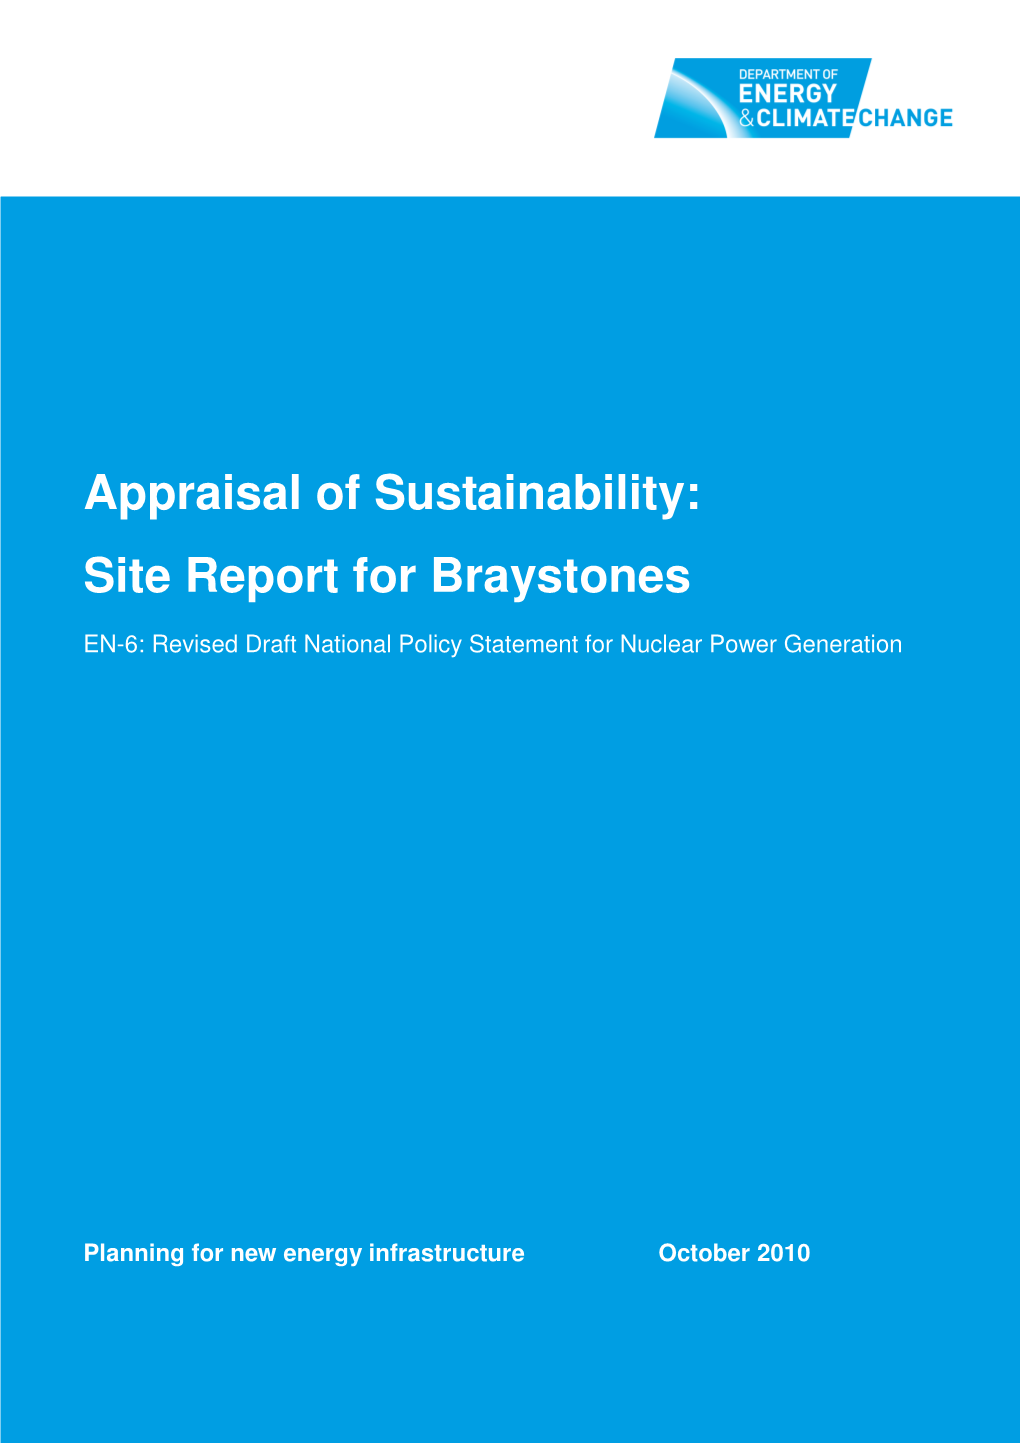 Site Report for Braystones